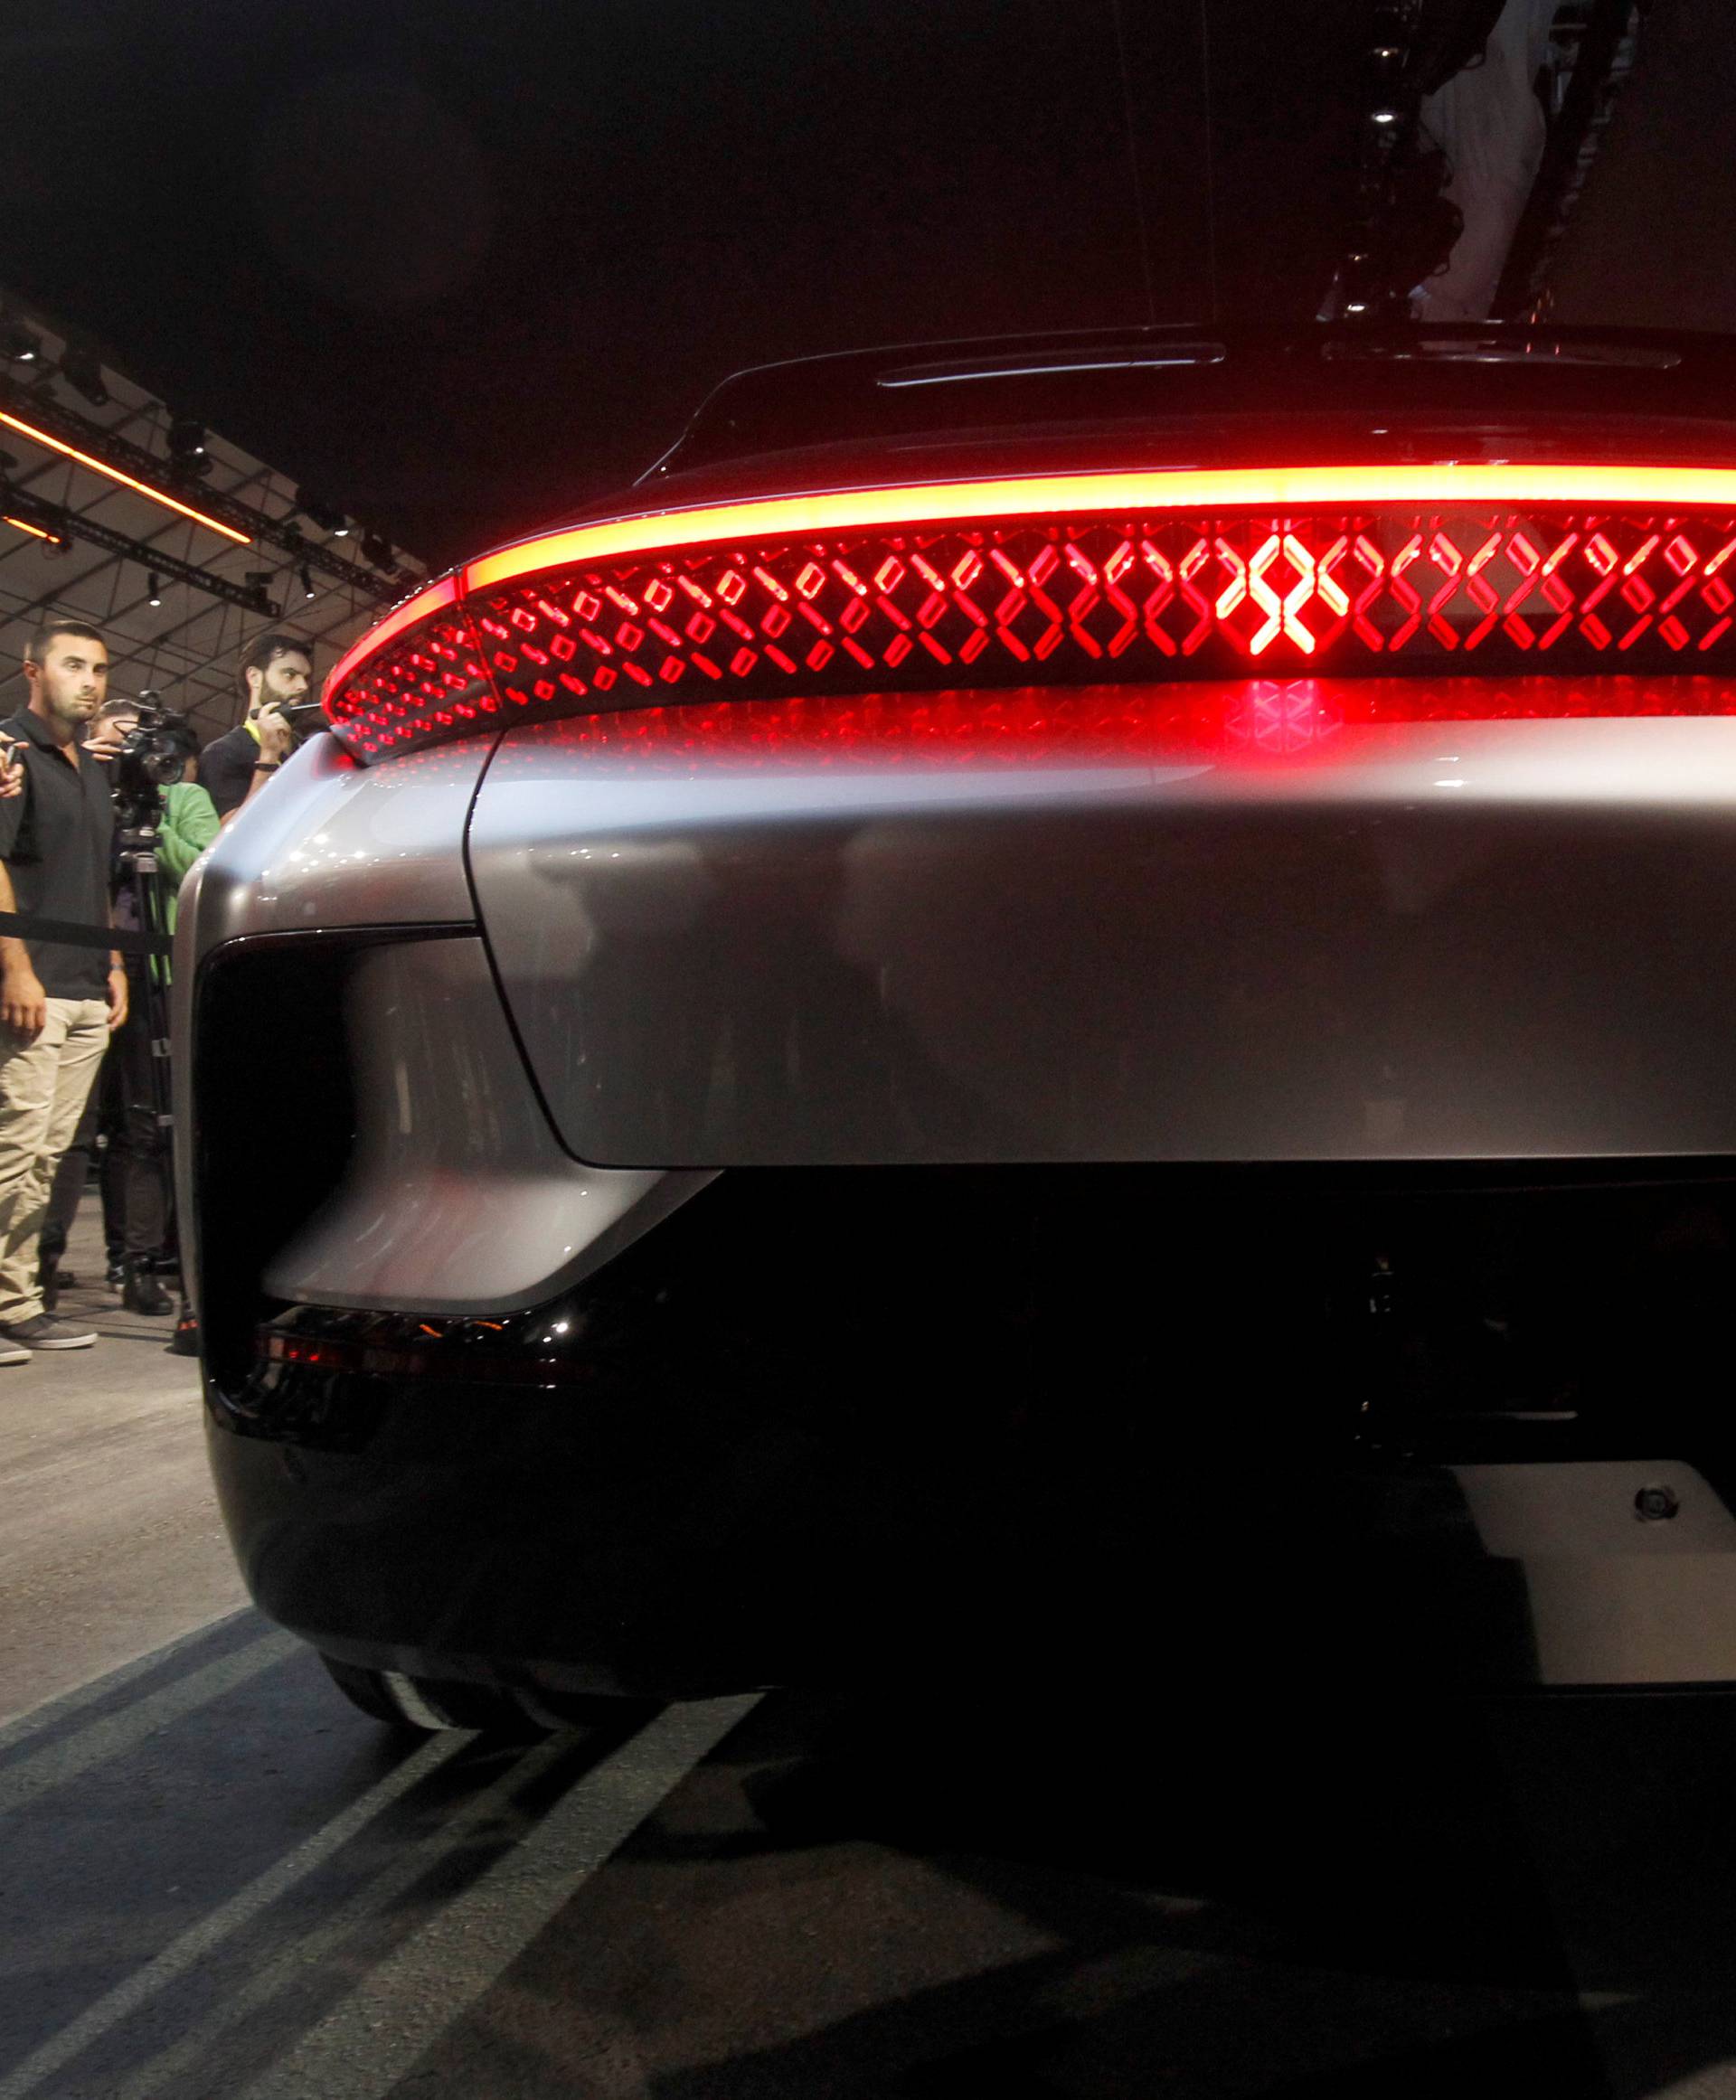 The rear of a Faraday Future FF 91 electric car is shown during an unveiling event at CES in Las Vegas